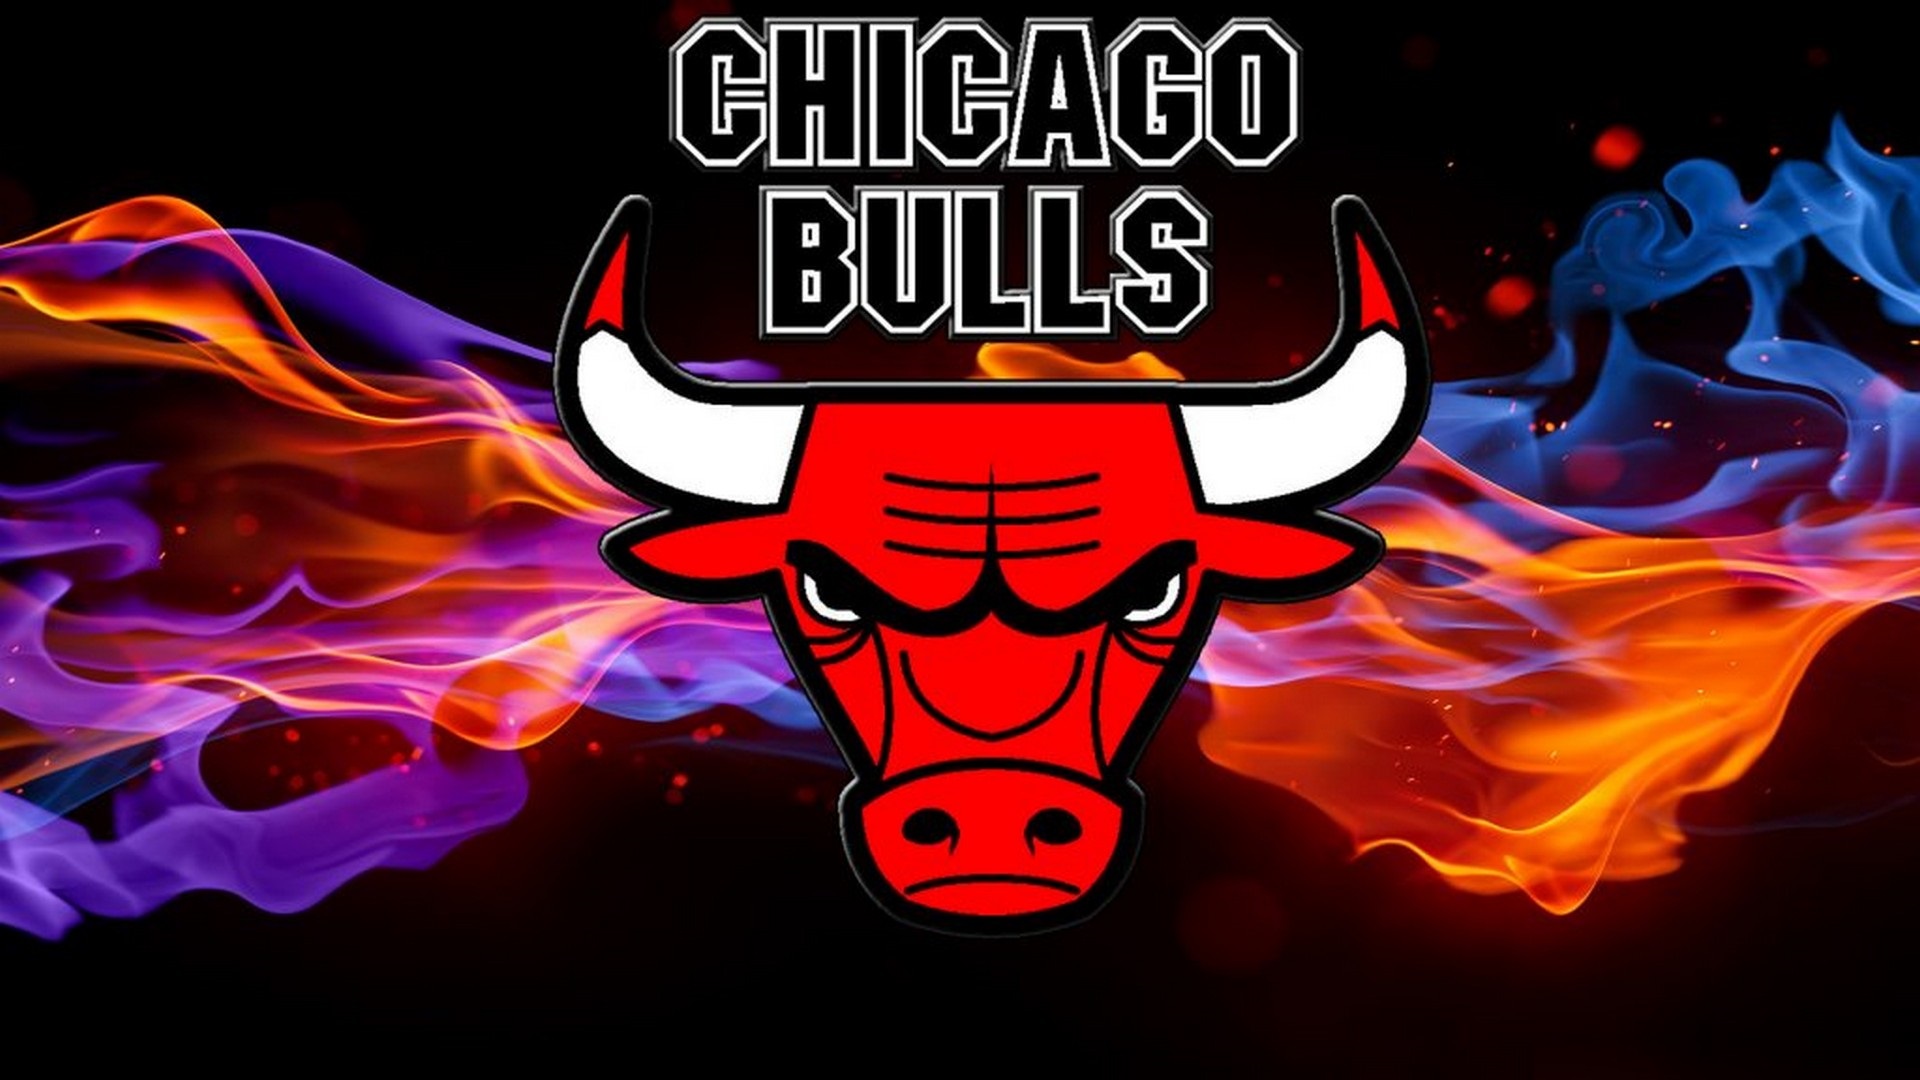 Chicago Bulls Wallpaper For Mac Backgrounds with high-resolution 1920x1080 pixel. You can use this wallpaper for your Desktop Computer Backgrounds, Windows or Mac Screensavers, iPhone Lock screen, Tablet or Android and another Mobile Phone device